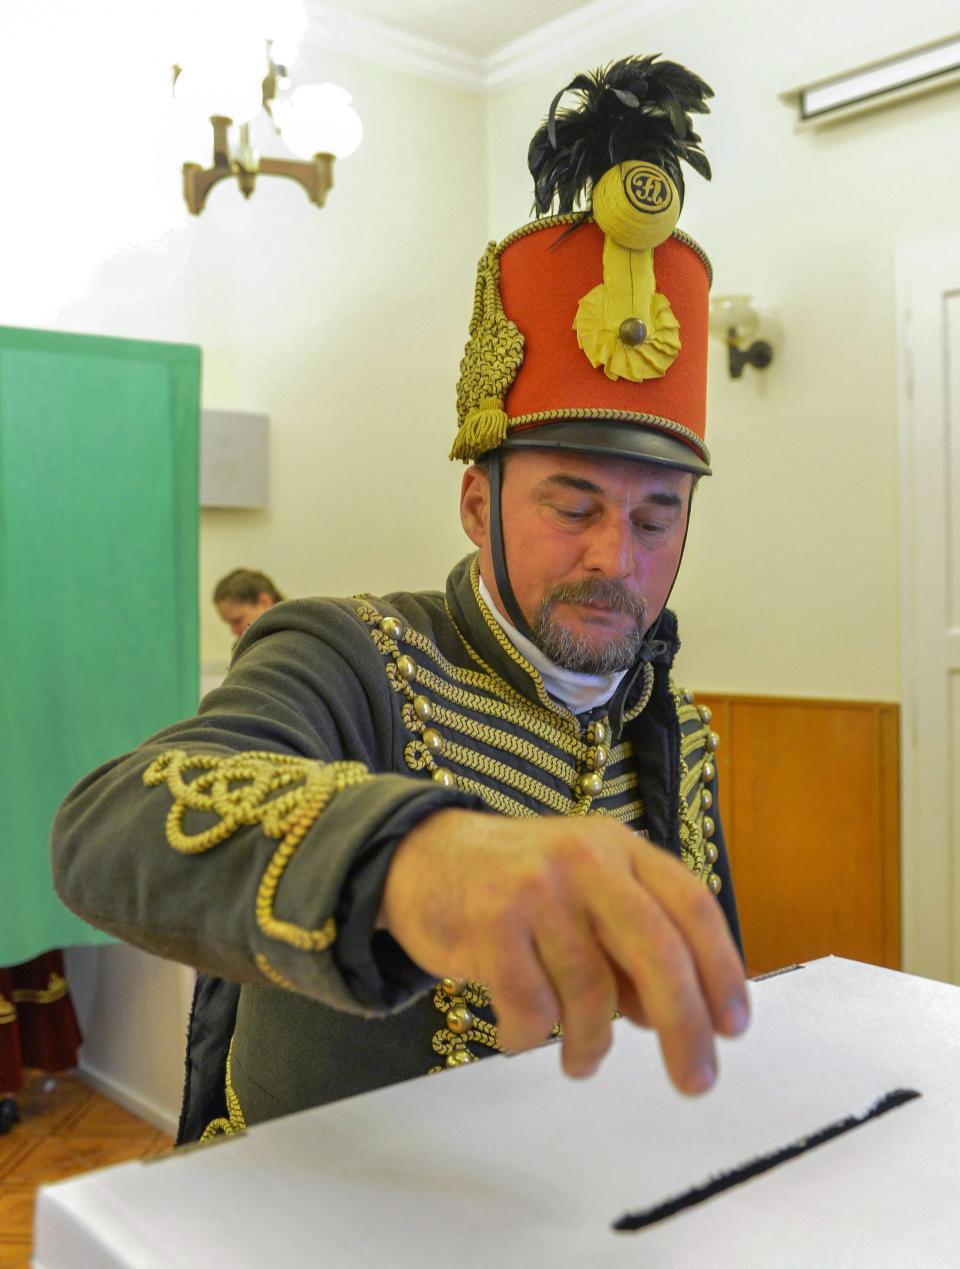 A traditionalist (no name available) dressed in a hussars’ uniform casts his ballot at a polling station in Isaszeg 35 kms northeast of Budapest during the parliamentary elections in Hungary, Sunday April 6, 2014. Hungary's governing party is tipped to win parliamentary elections Sunday, while a far-right party is expected to make further gains, according to polls. Prime Minister Viktor Orban's Fidesz party and its small ally, the Christian Democrats, are expected to win easily and they may even retain the two-thirds majority in the legislature gained in 2010 which allowed them to pass a new constitution, adopt unconventional economic policies, centralize power and grow the state's influence at the expense of the private sector.(AP Photo/MTI,Tibor Illyes)